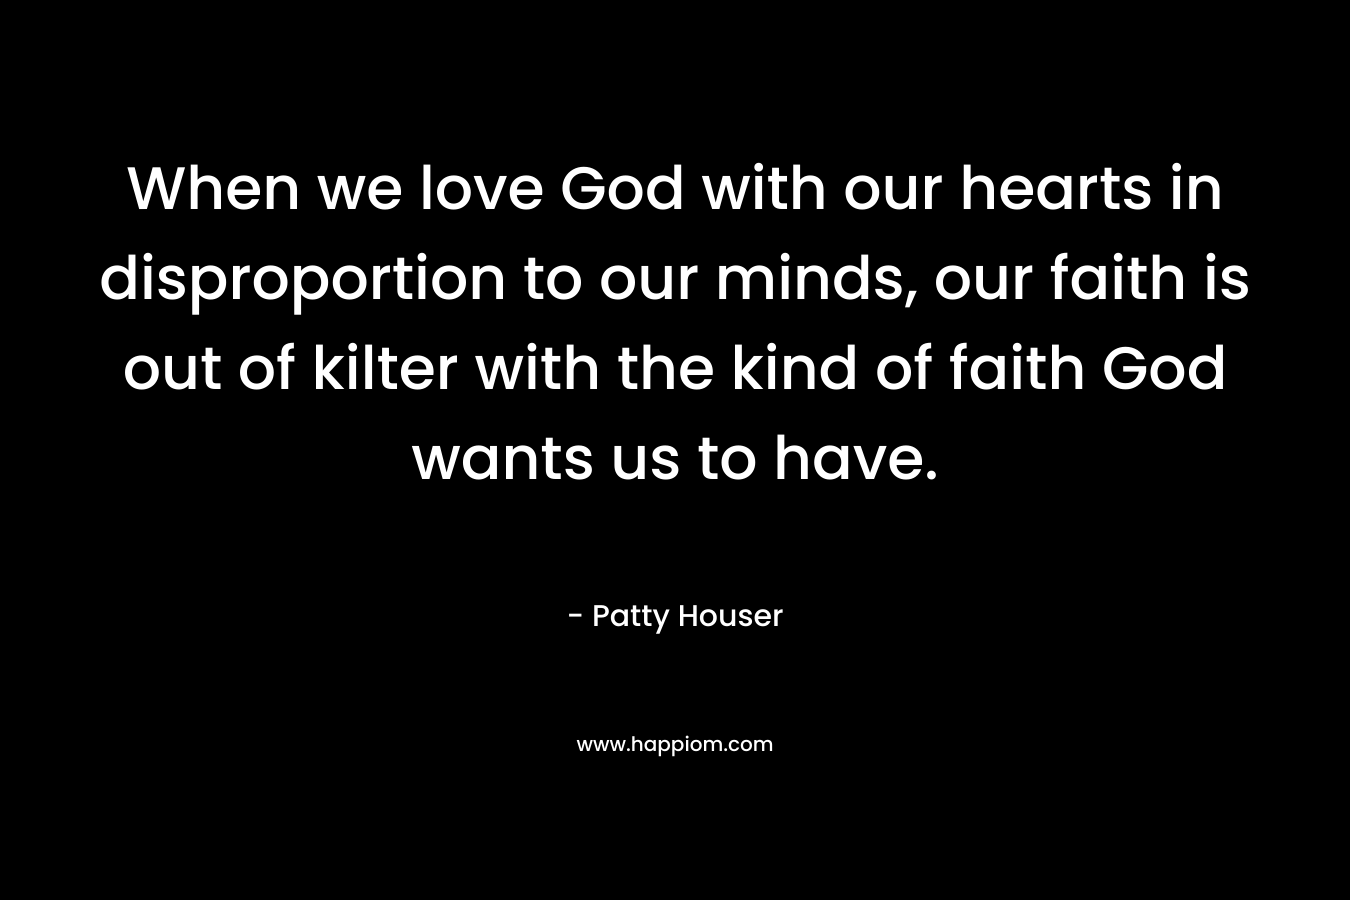 When we love God with our hearts in disproportion to our minds, our faith is out of kilter with the kind of faith God wants us to have.